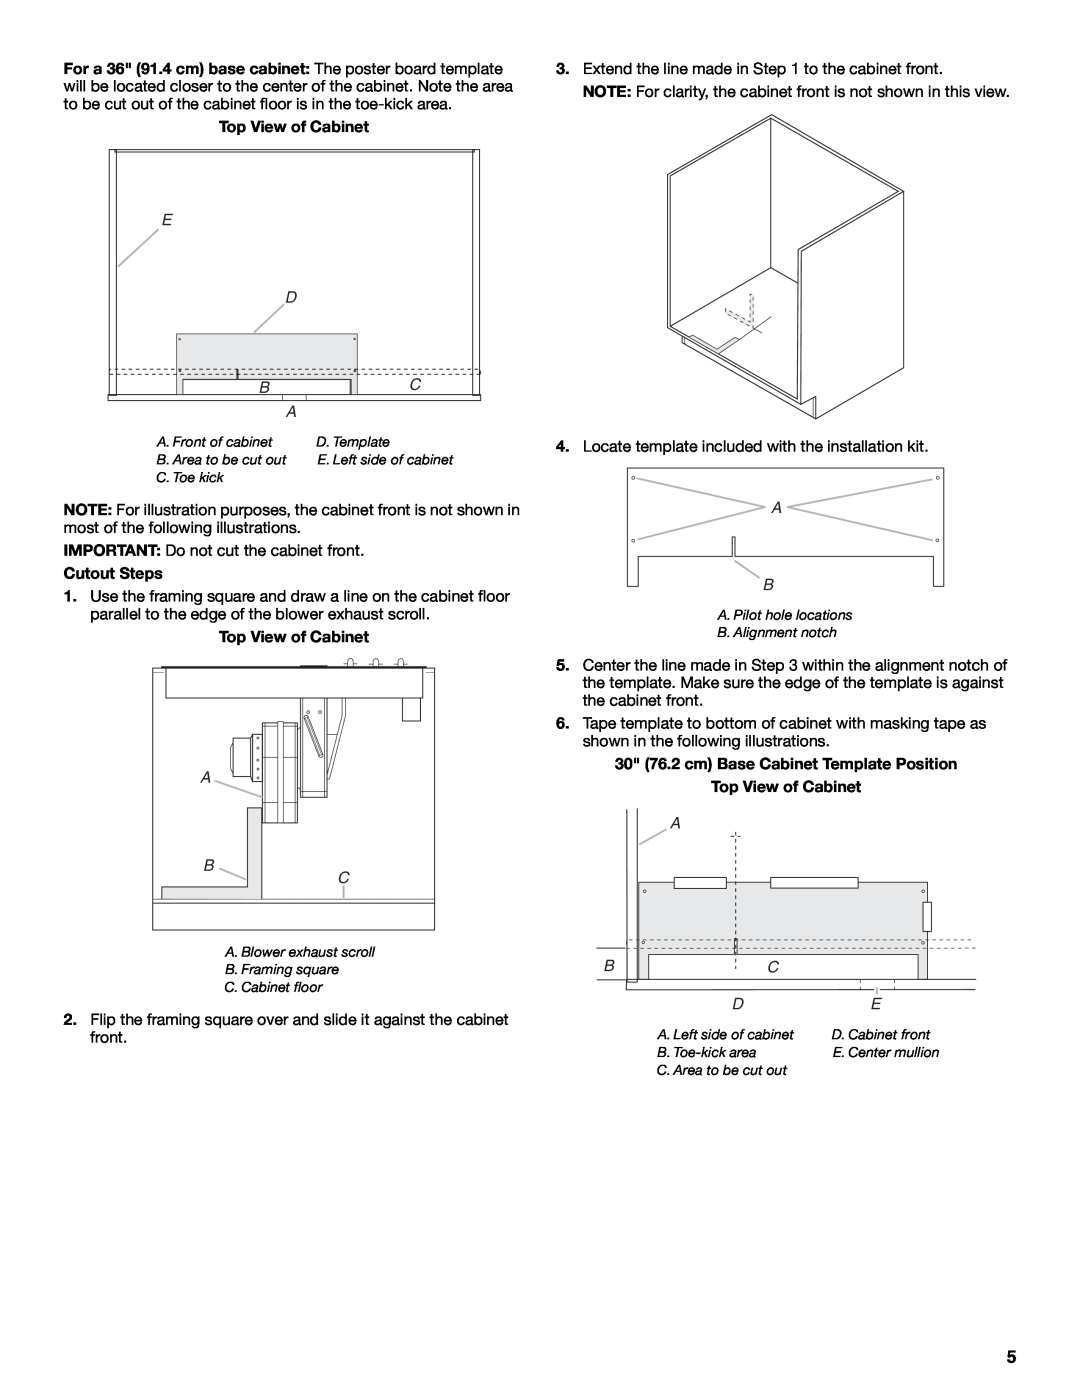 Jenn-Air W10439669A installation instructions Cutout Steps, 30 76.2 cm Base Cabinet Template Position, Top View of Cabinet 